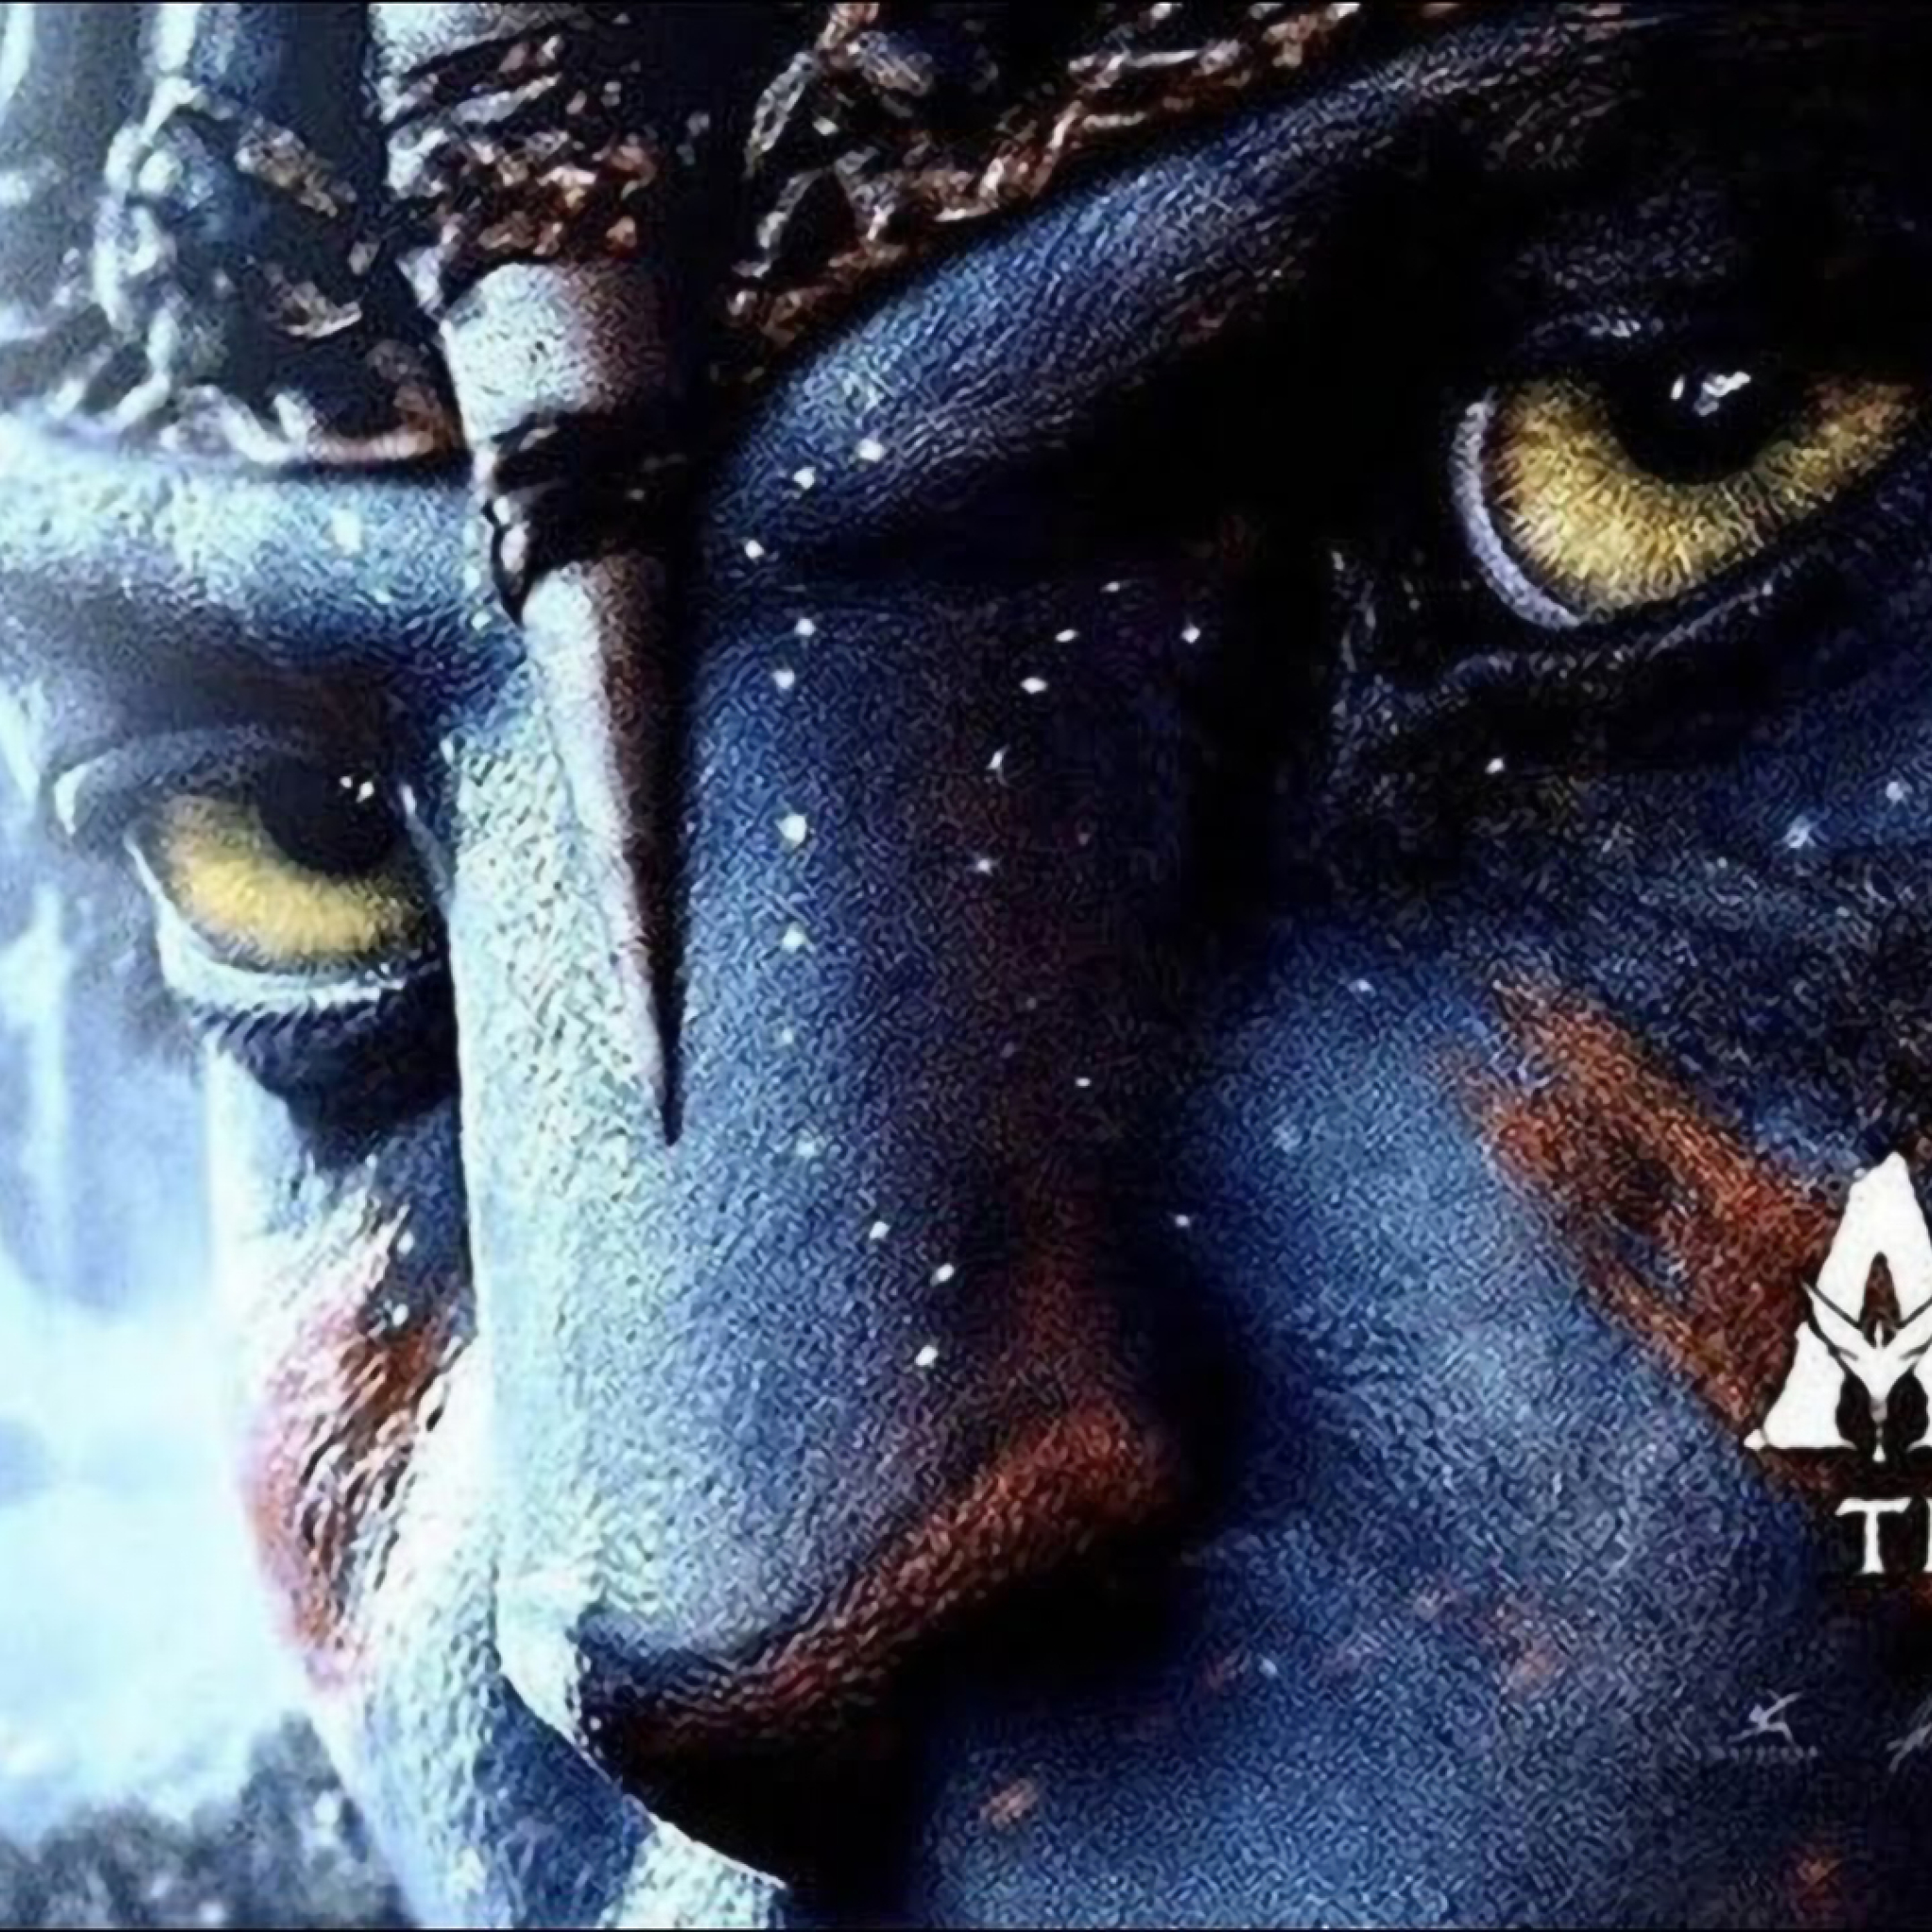 Avatar: The Way of Water download the new version for windows